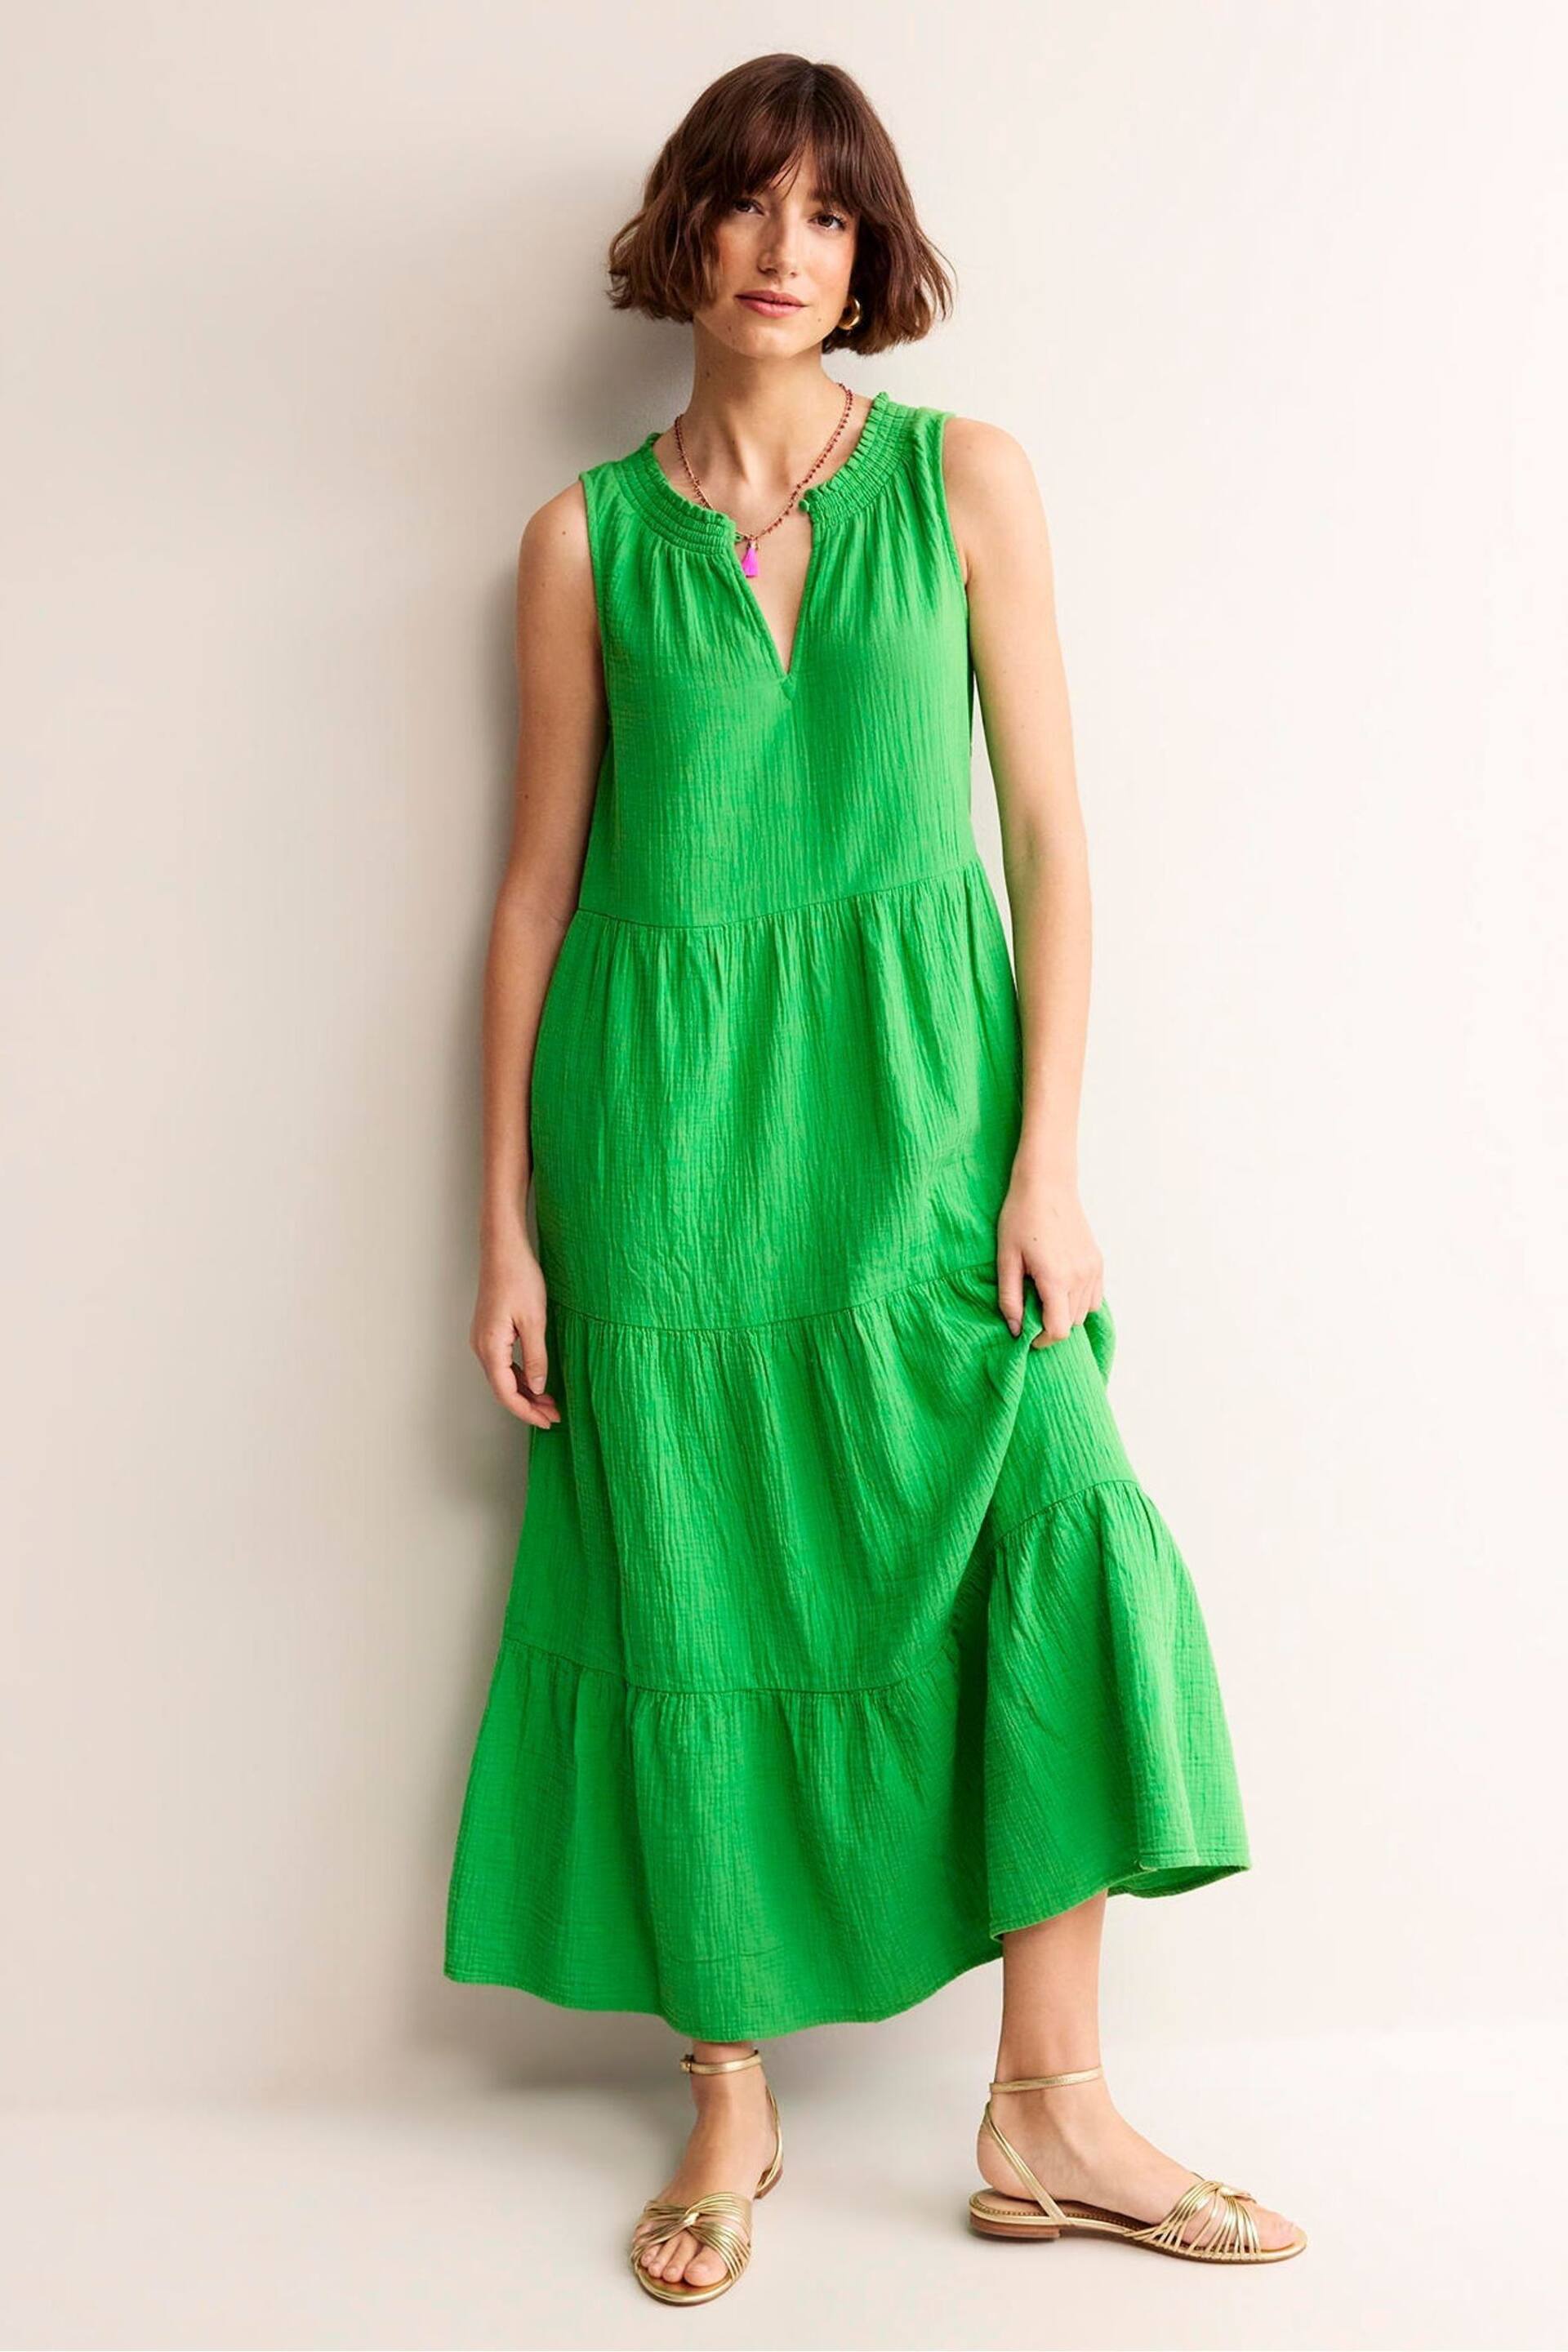 Boden Green Double Cloth Maxi Tiered Dress - Image 1 of 5